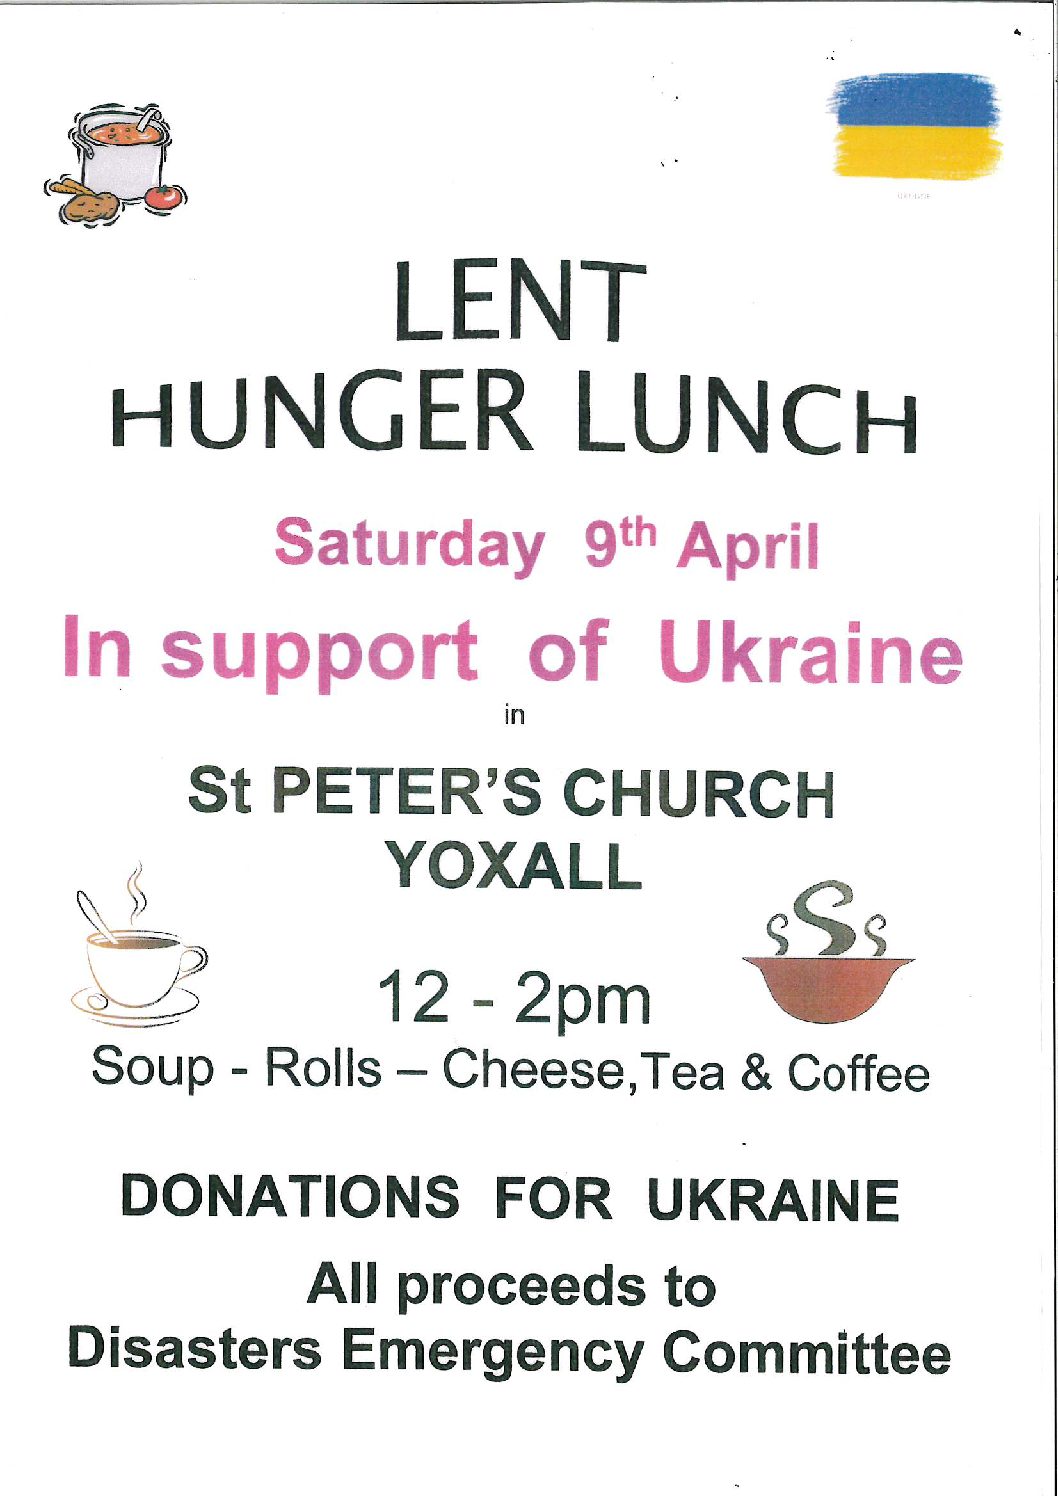 Lent Hunger Lunch – Saturday, 9th April 2022